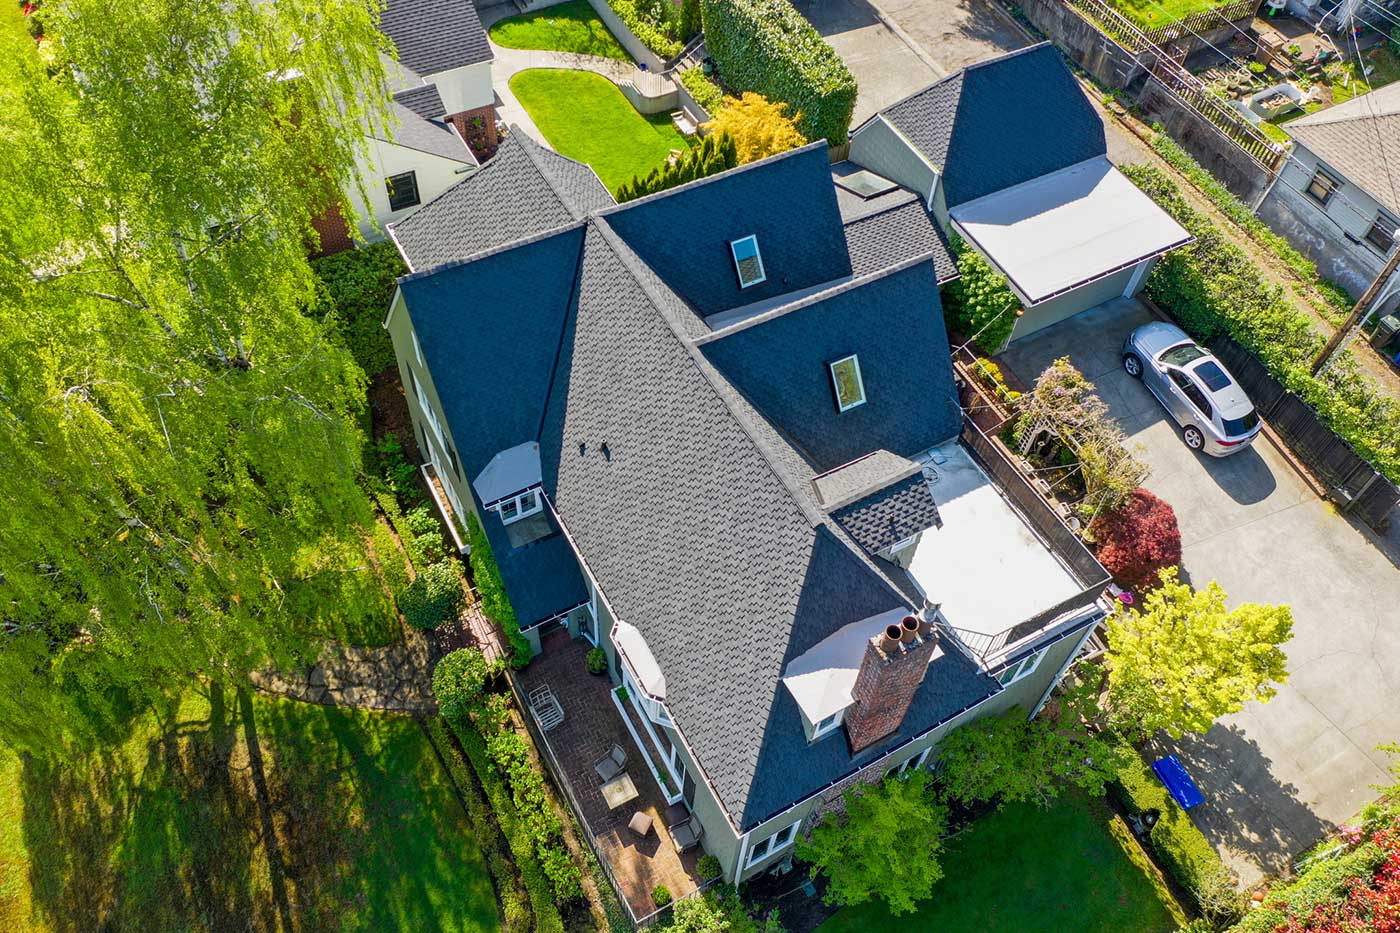 New Composite Asphalt Shingles Roof in Tacoma, Washington: overhead view of roof from an angle